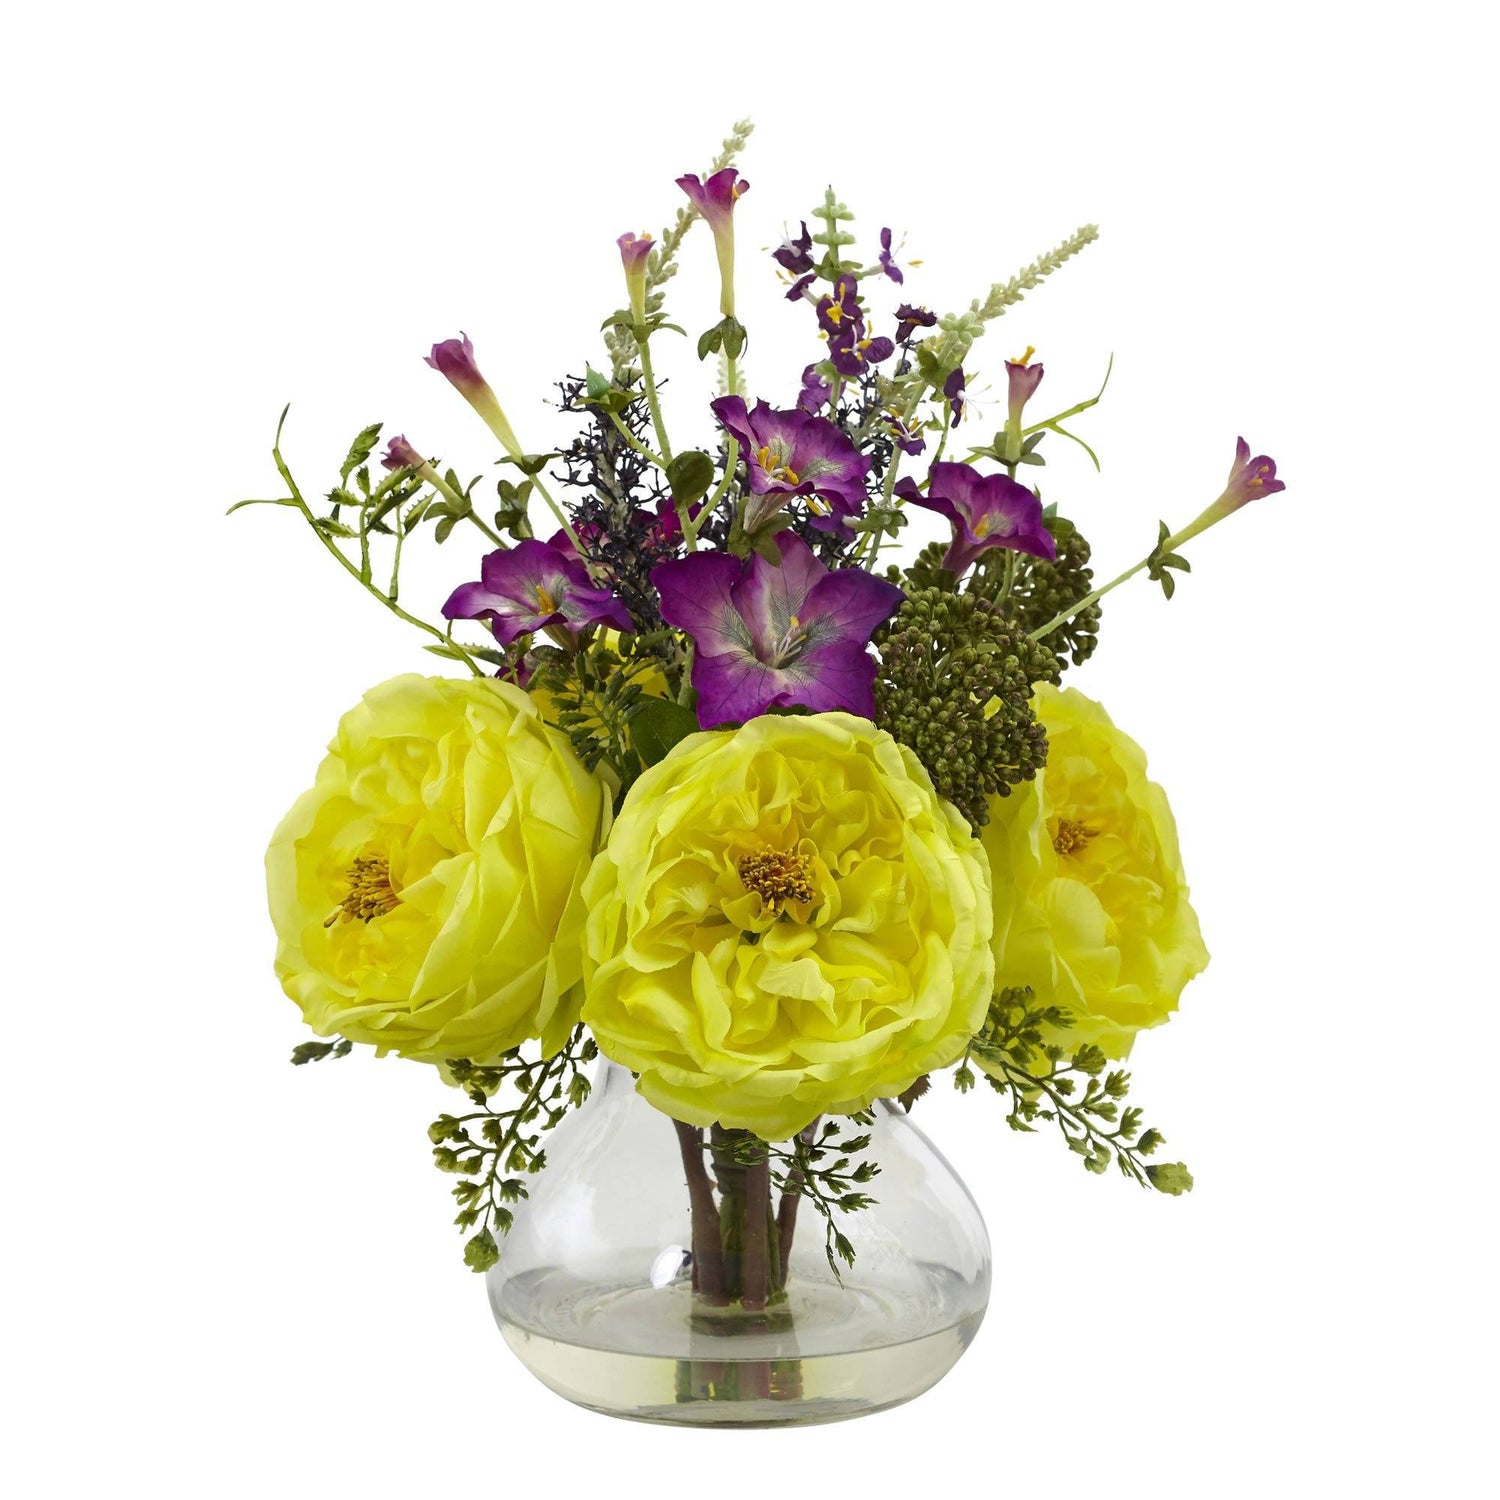 Rose and Morning Glory Arrangement with Vase